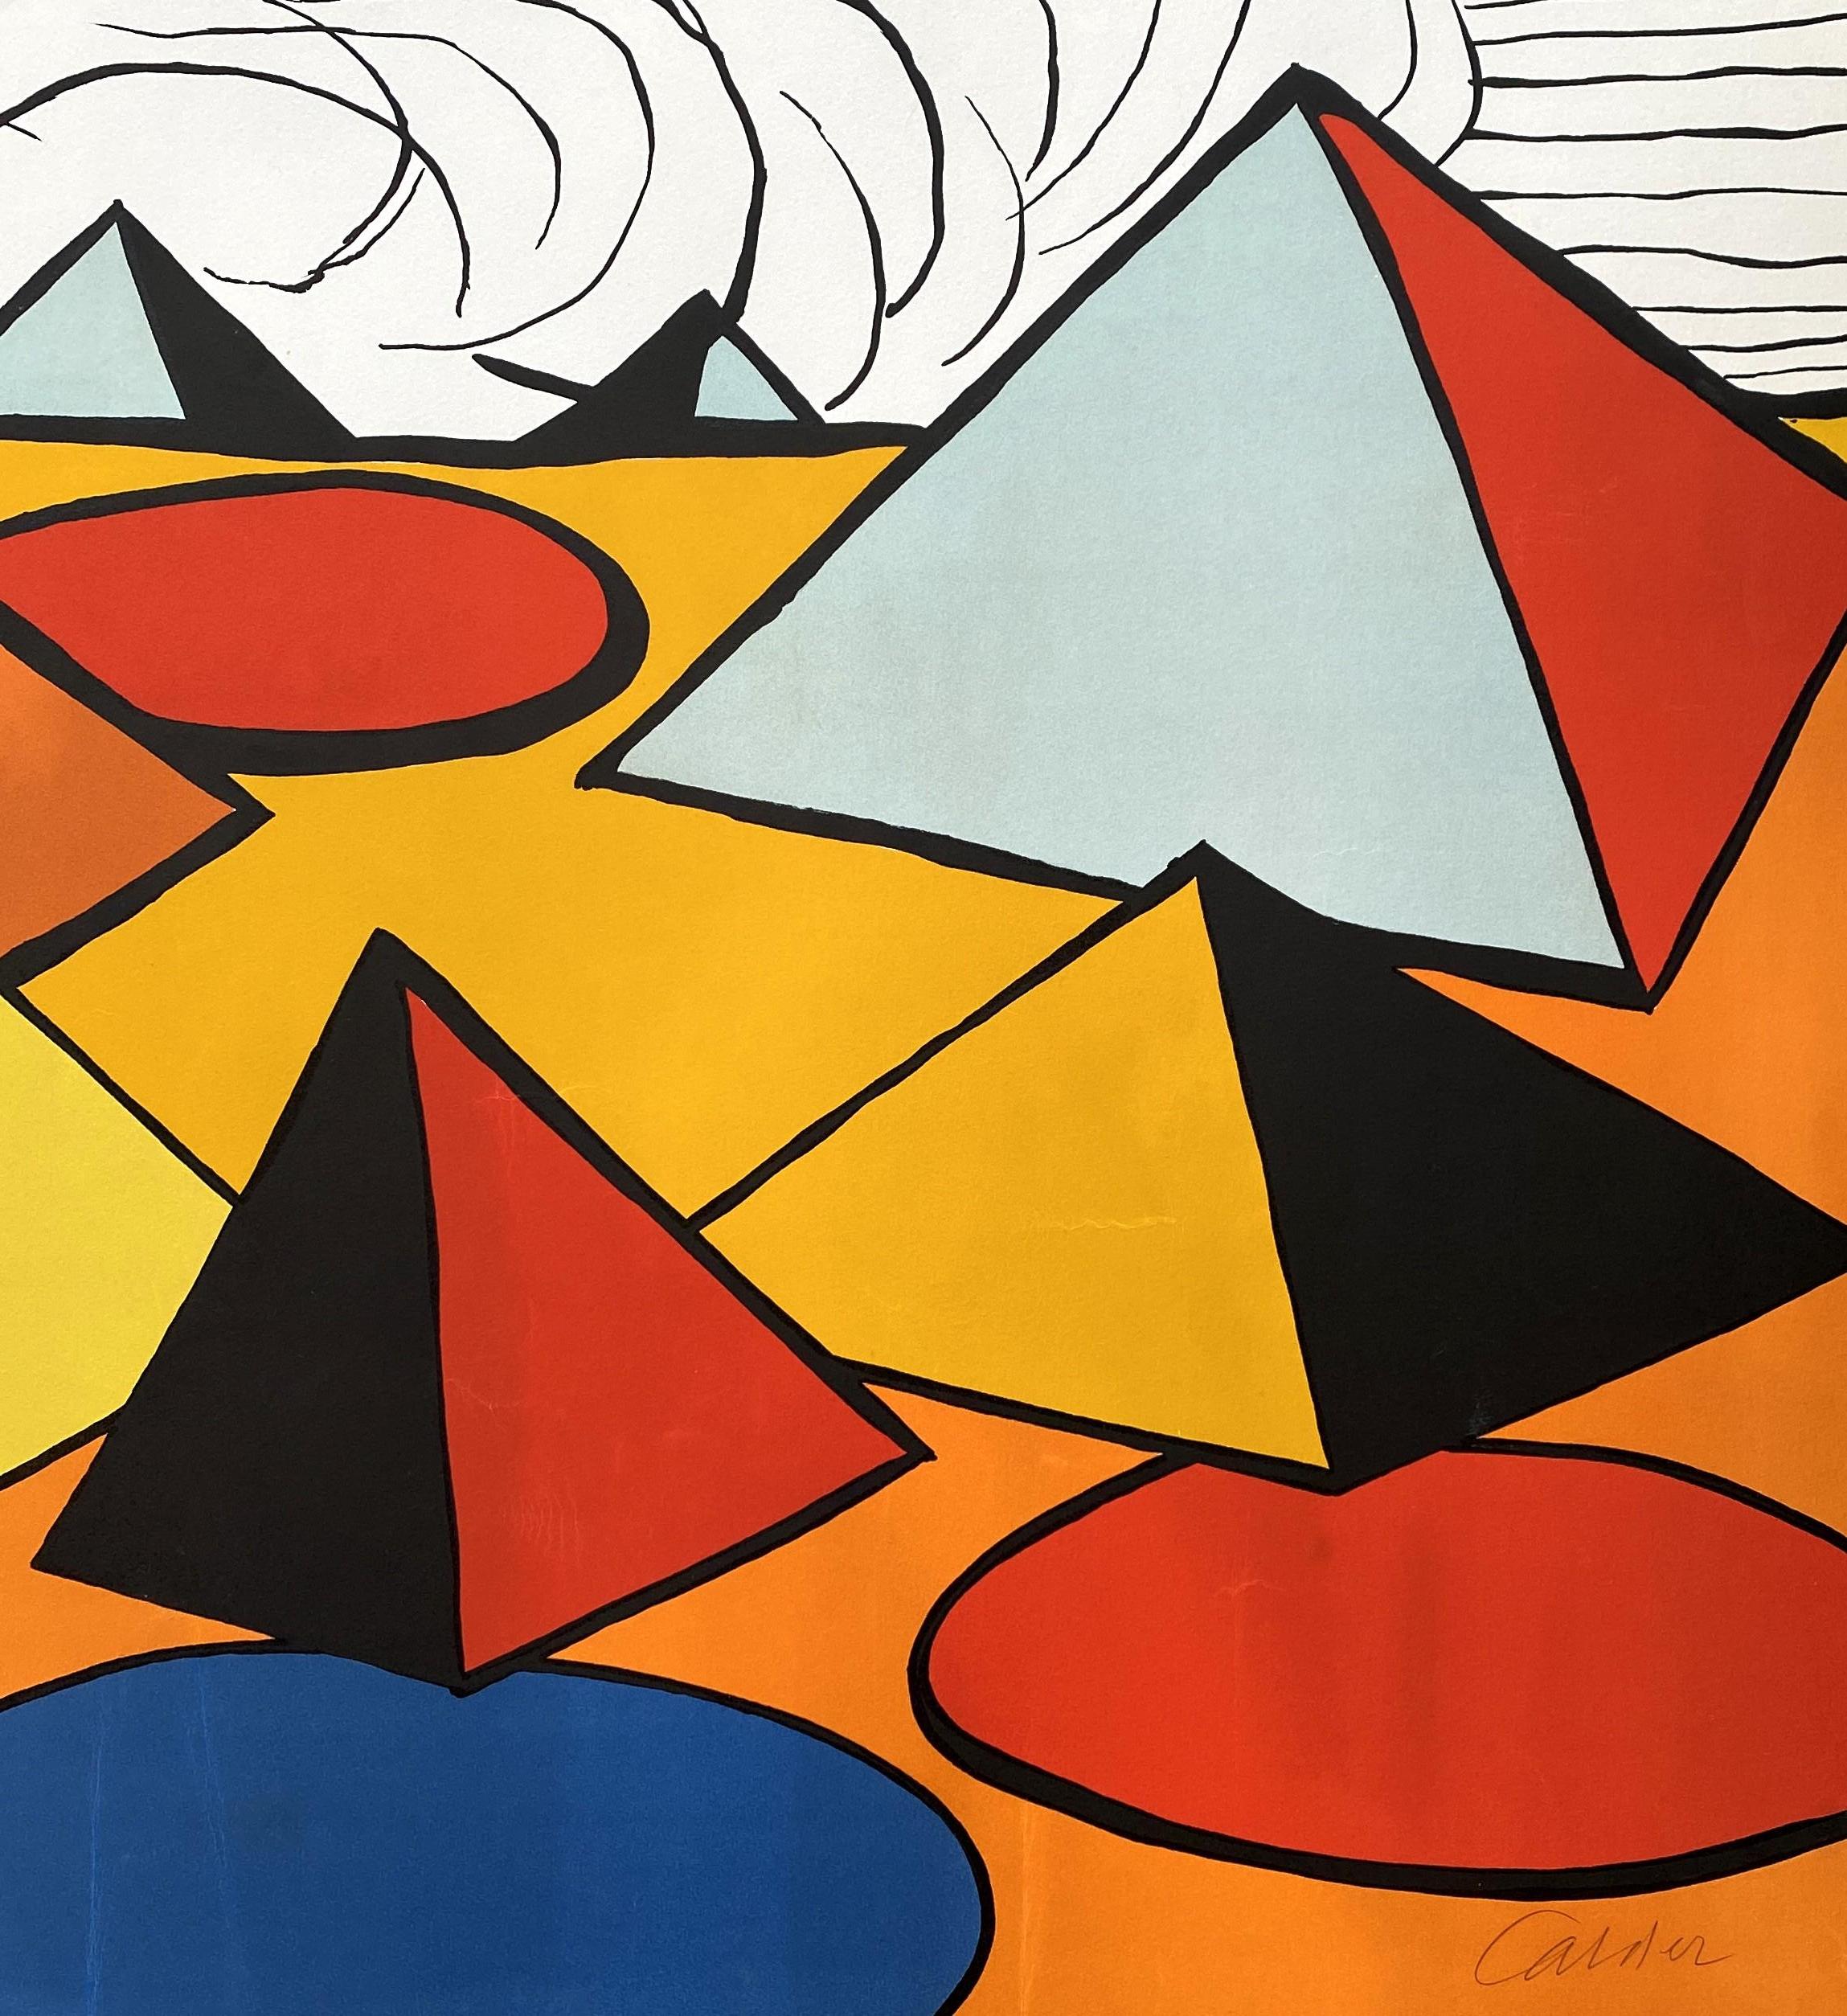 Egypt, Multicolored Pyramids - Original Lithograph Hand Signed  - Abstract Print by Alexander Calder